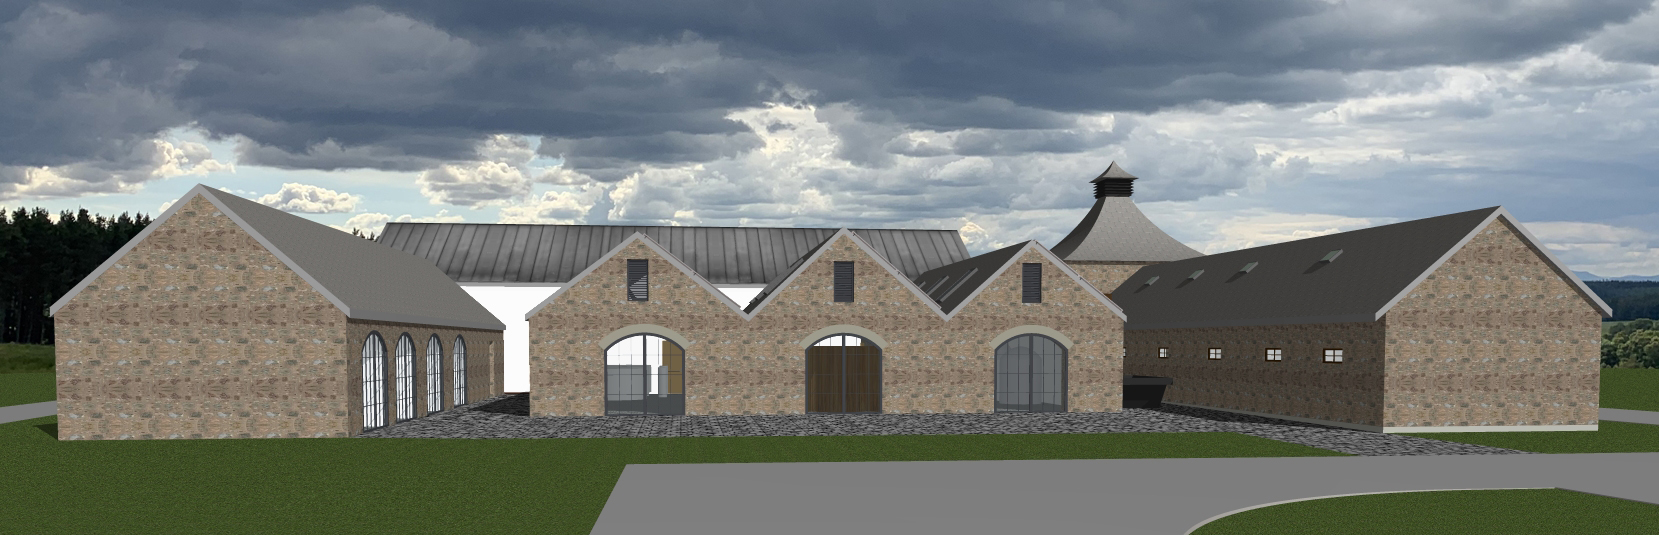 Plans submitted for new whisky distillery in Moray